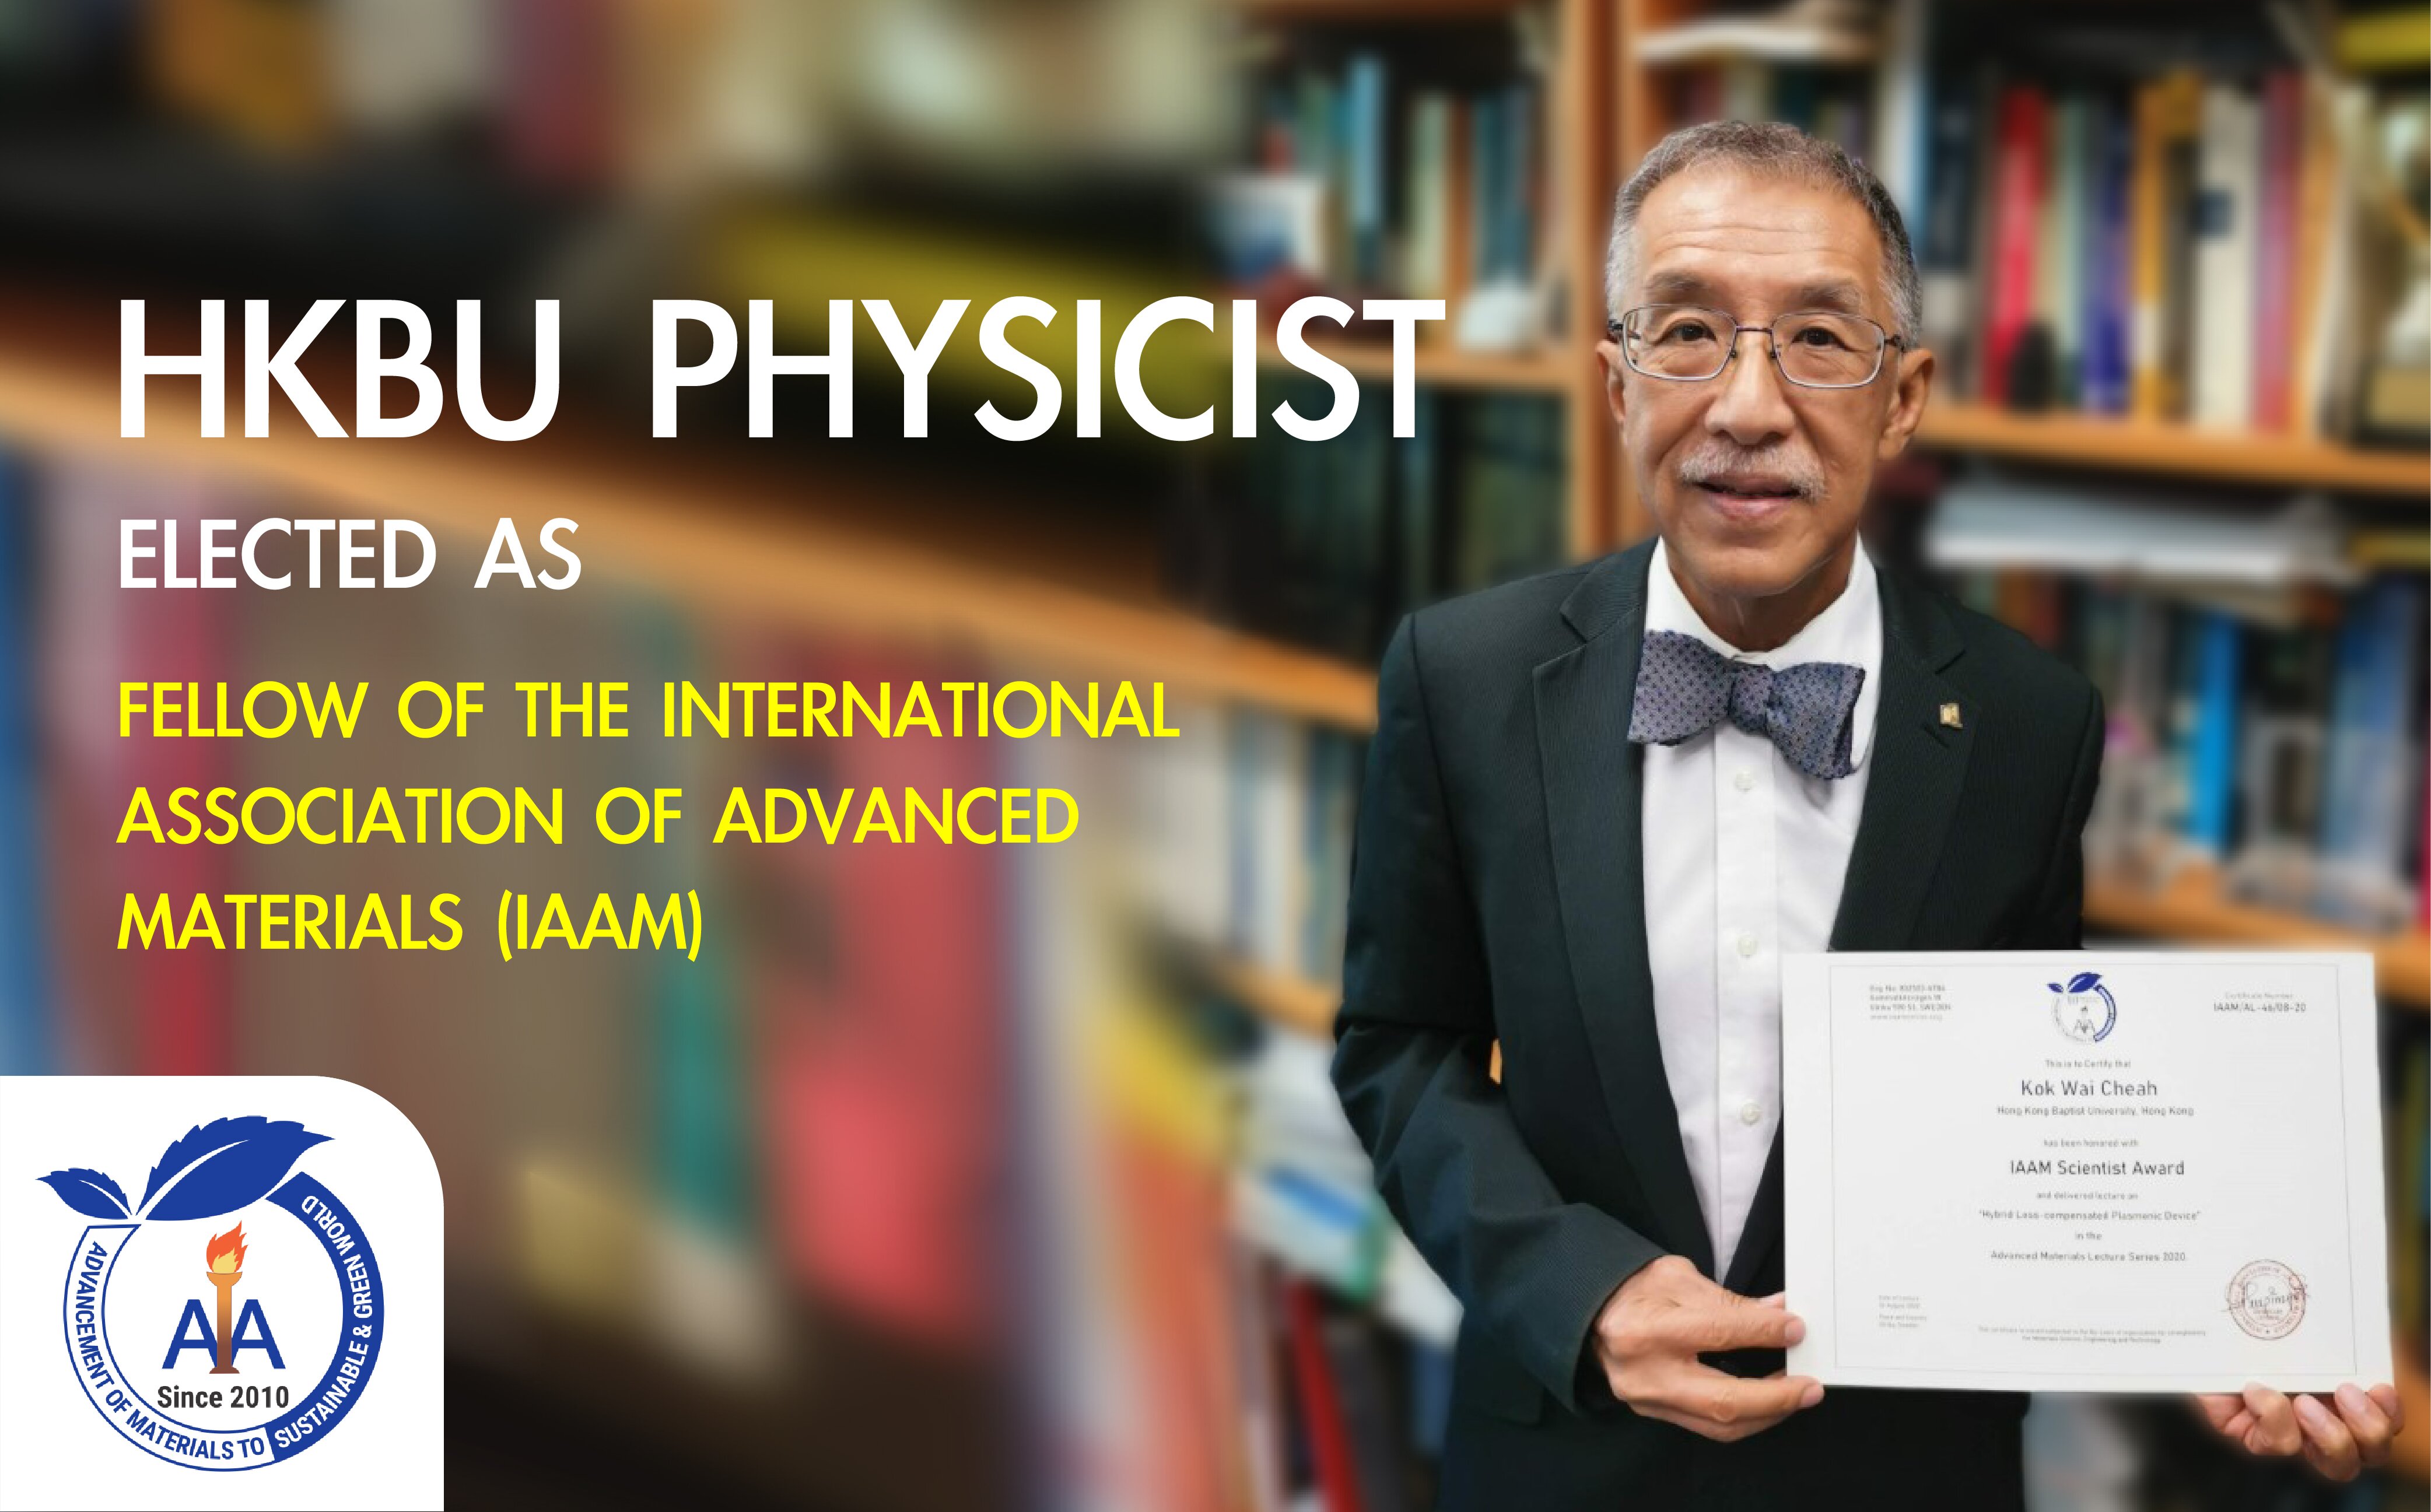 Congratulations to Prof Cheah Kok Wai, Dr. Elizabeth K. S. Law Endowed Professor in Advanced Materials of Department of Physics, for being elected as a fellow of the International Association of Advanced Materials (IAAM), in recognition of his contribution towards “Advancement of Materials to Global Excellence”.     Prof Cheah is also invited to deliver his IAAM Fellow Lecture in the in International Conclave on Materials, Energy and Climate, 12 – 14 December 2022, Delhi NCR, India (ICMEC, www.advancedmaterialscongress.org/conclave) with Onsite - Online LIVE hybrid setups.     Congratulations again to Prof Cheah!     International Association of Advanced Materials (IAAM, www.iaamonline.org) is one of the leading non-profit scientific research organization to promote Advanced Materials Science, Engineering, and Technology. The IAAM has a rich legacy of 7500+ Fellow Scientists and medal lectures from 100+ countries. The congress assembly intends to provide an opportunity for promoting intensive discussions on the recent trends and networking; to enhance and widen the knowledge of materials science, engineering and technology; and to surge innovation and technological awareness for climate neutral world.